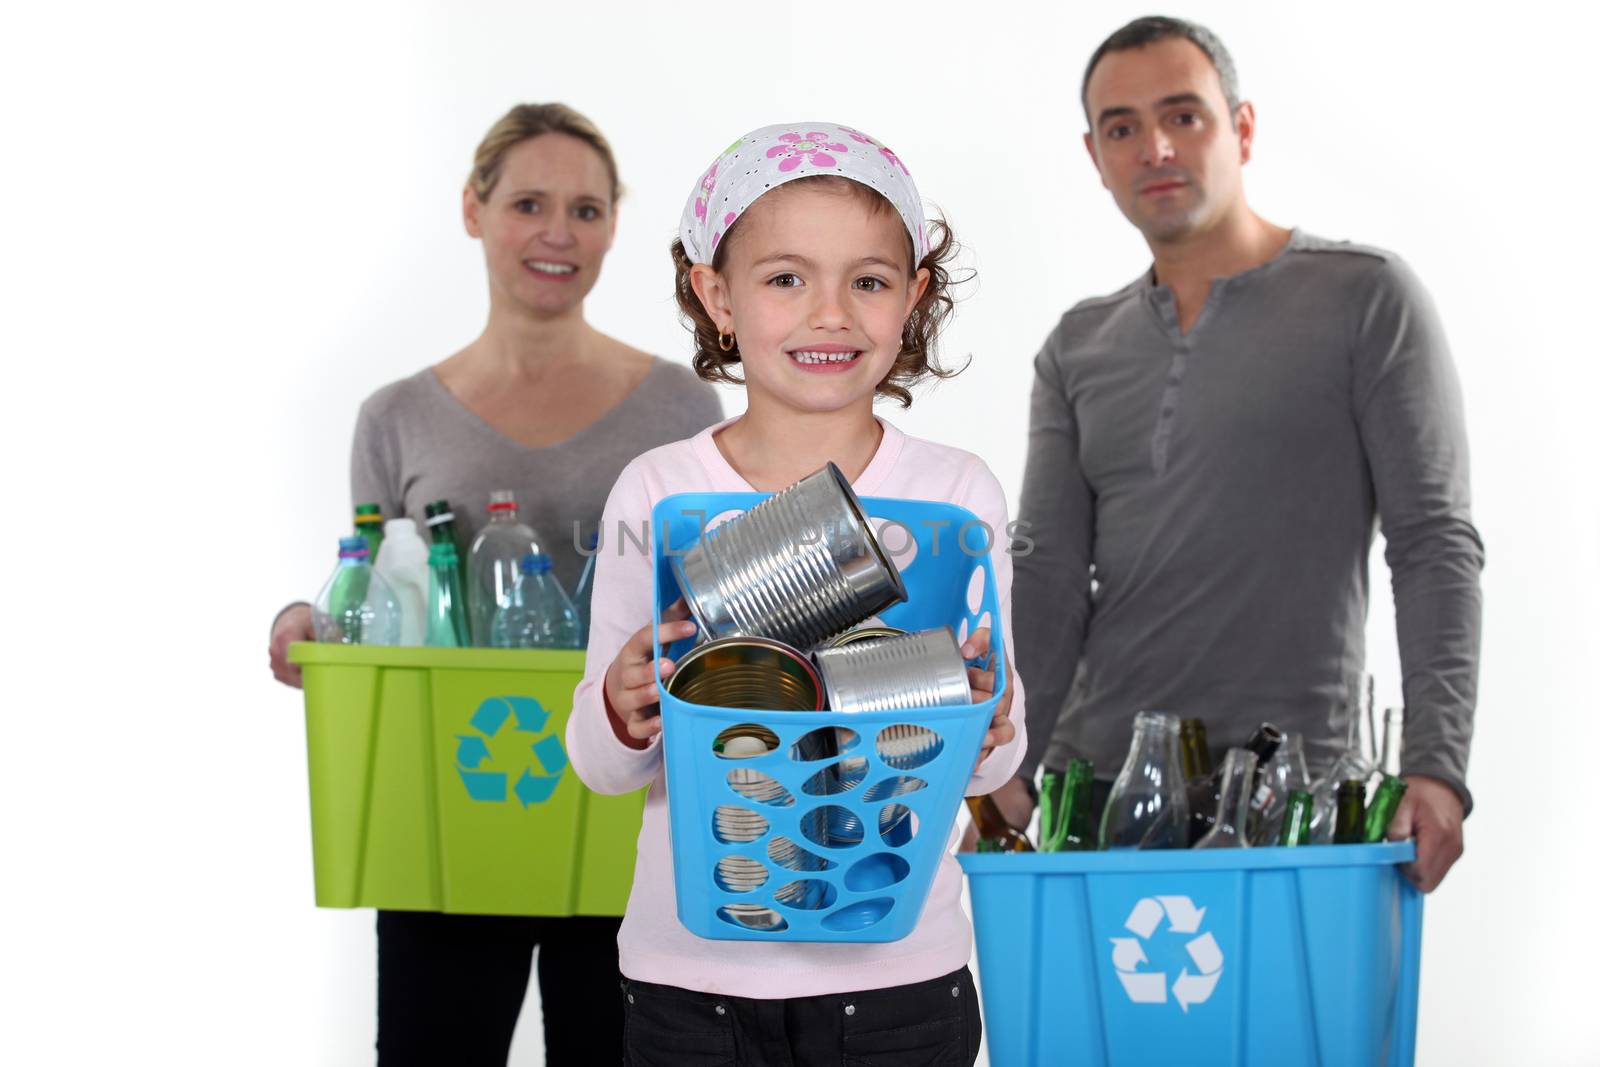 Family recycling Lacrouts_Isabelle_230311,Paniandy_Eric_230311,Armand_Lea_230311